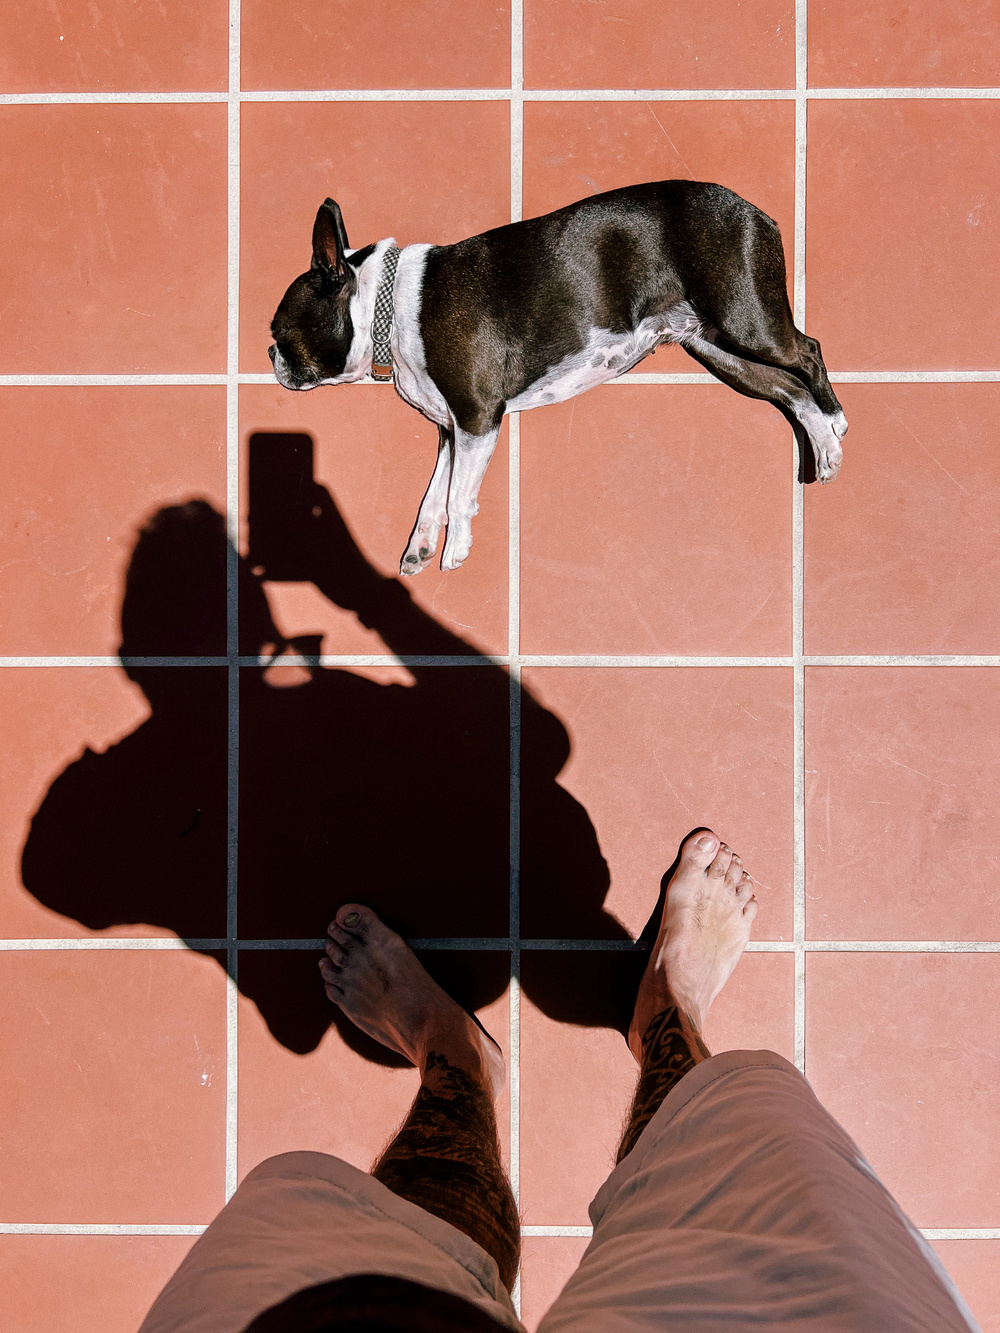 A person with tattoos on their legs is standing barefoot on terracotta-colored tiles, taking a photo. The shadow of the person holding a smartphone is cast on the tiles. A Boston Terrier dog is lying on its side on the tiles, wearing a collar.